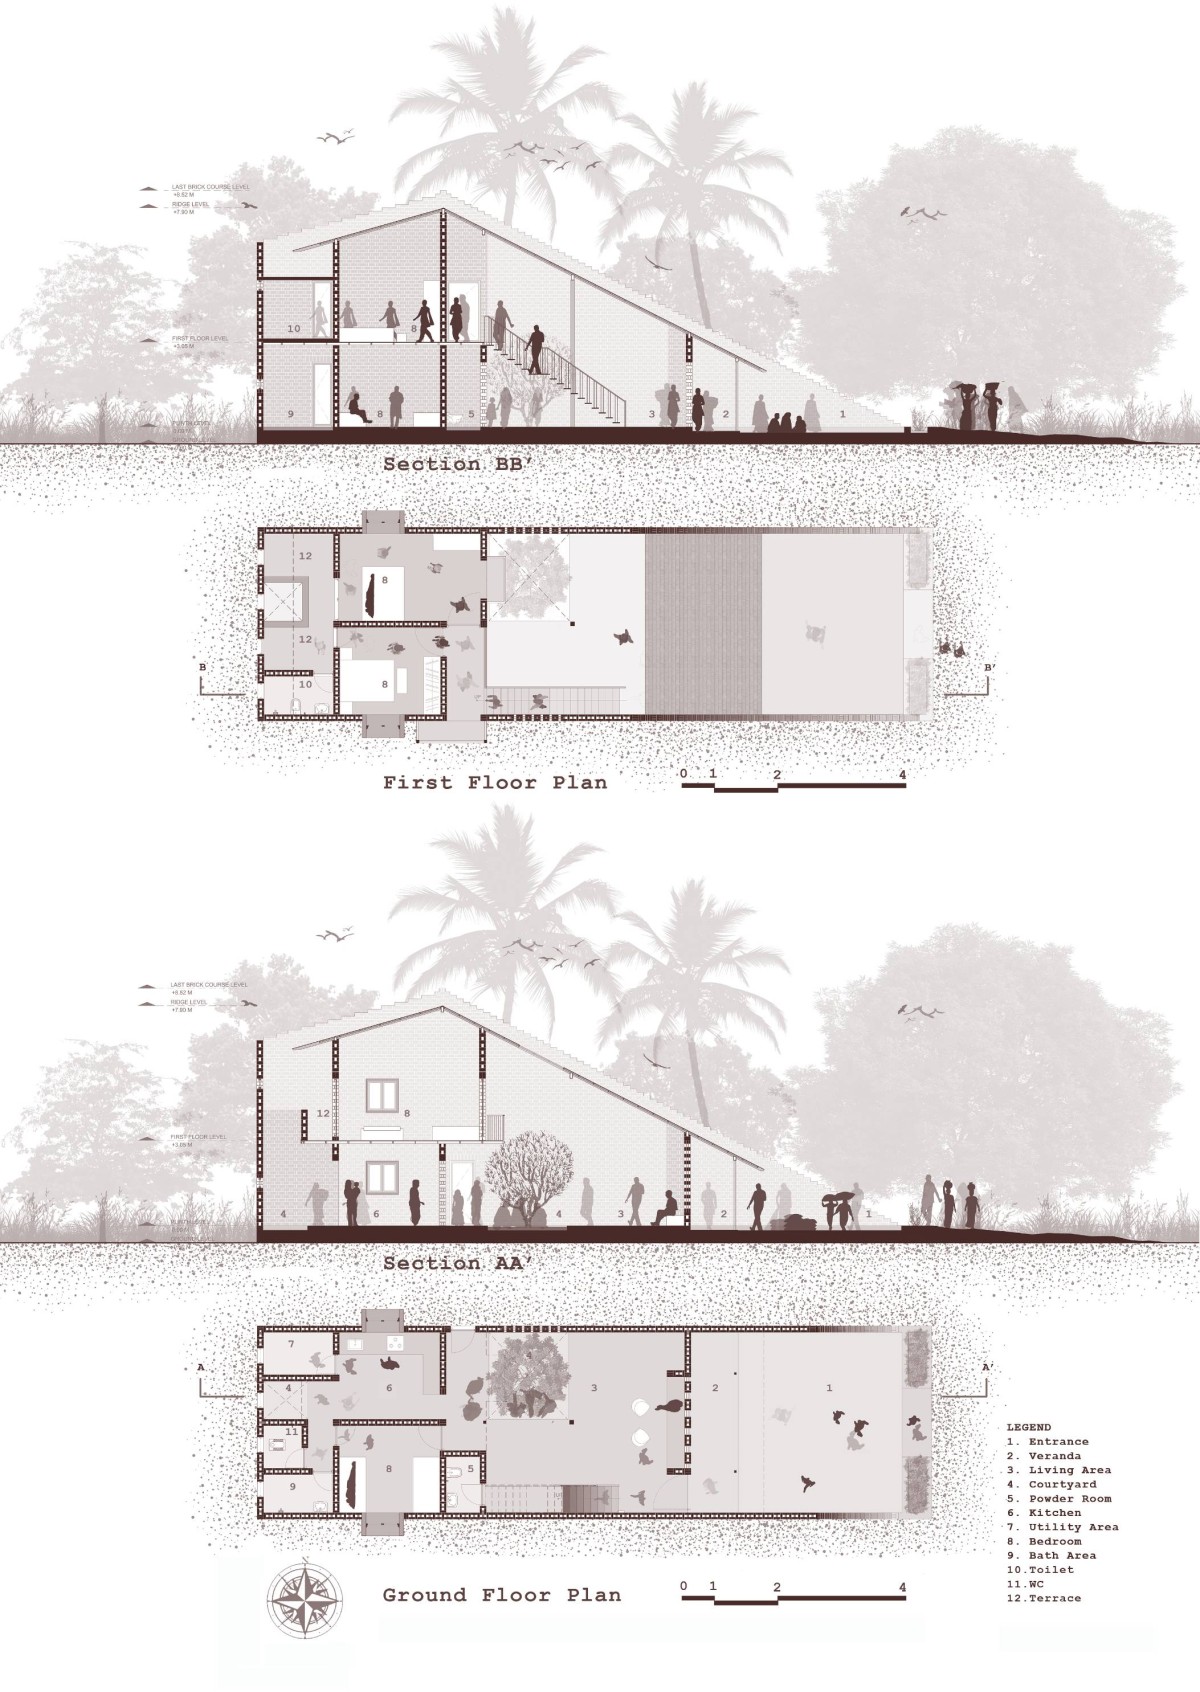 Plan and Sections of Half Is More – House in Progress by Atelier Shantanu Autade + Studio Boxx